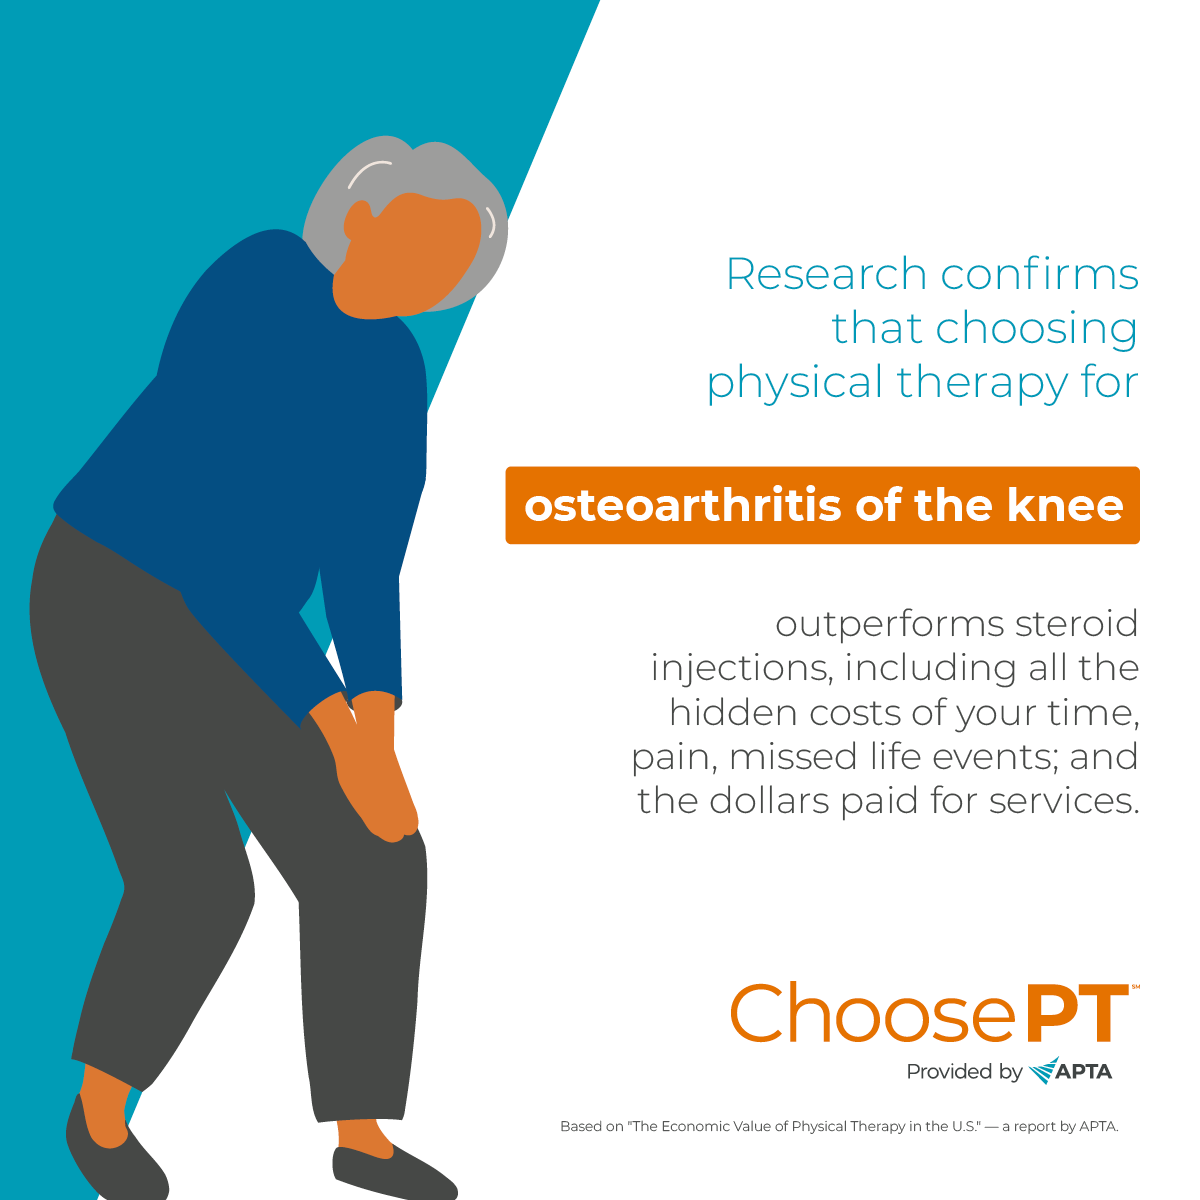 #ValueOfPT findings from @APTAtweets show that choosing physical therapy for OA of the knee outperforms steroid injections and is cost-effective. This #ArthritisAwarenessMonth, read how physical therapists can help those with osteoarthritis of the knee:  choosept.com/did-you-know/p…